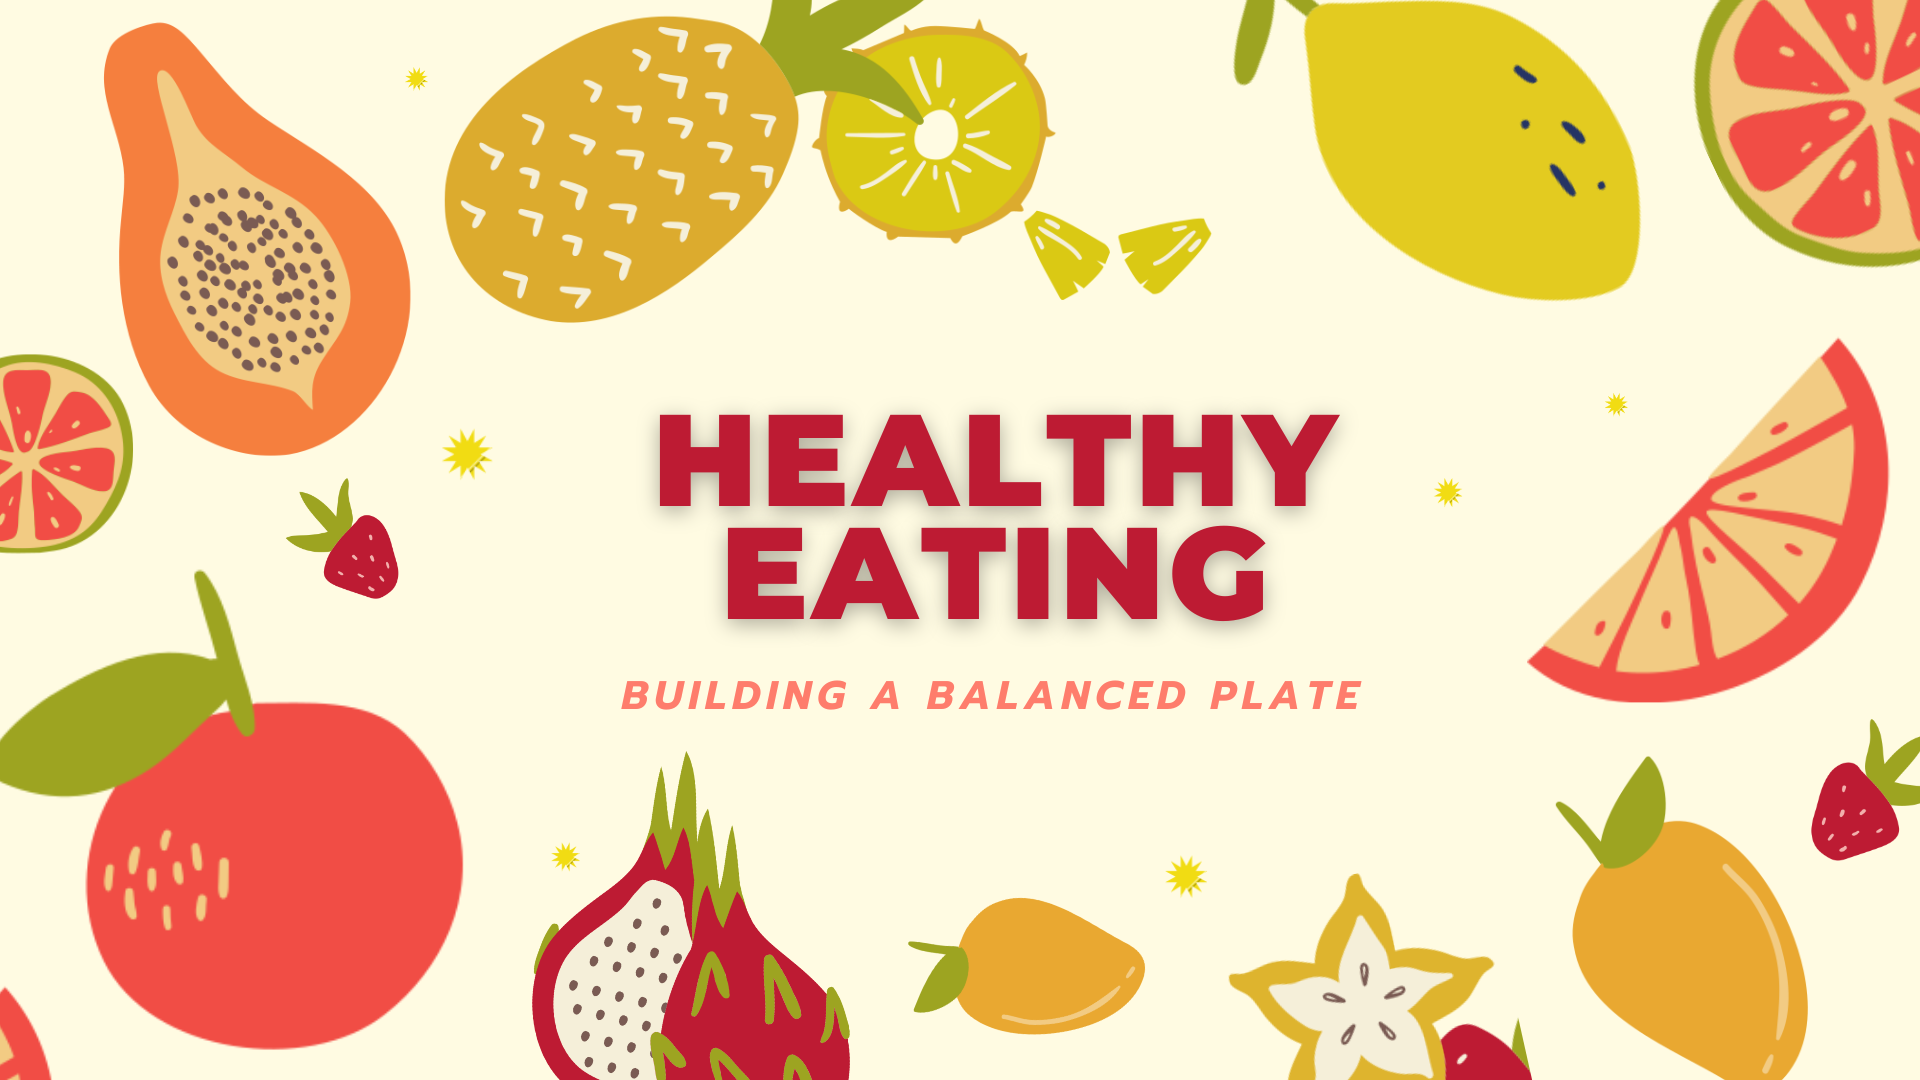 Healthy Eating Building a Balanced Plate. Text surrounded by colorful fruits.